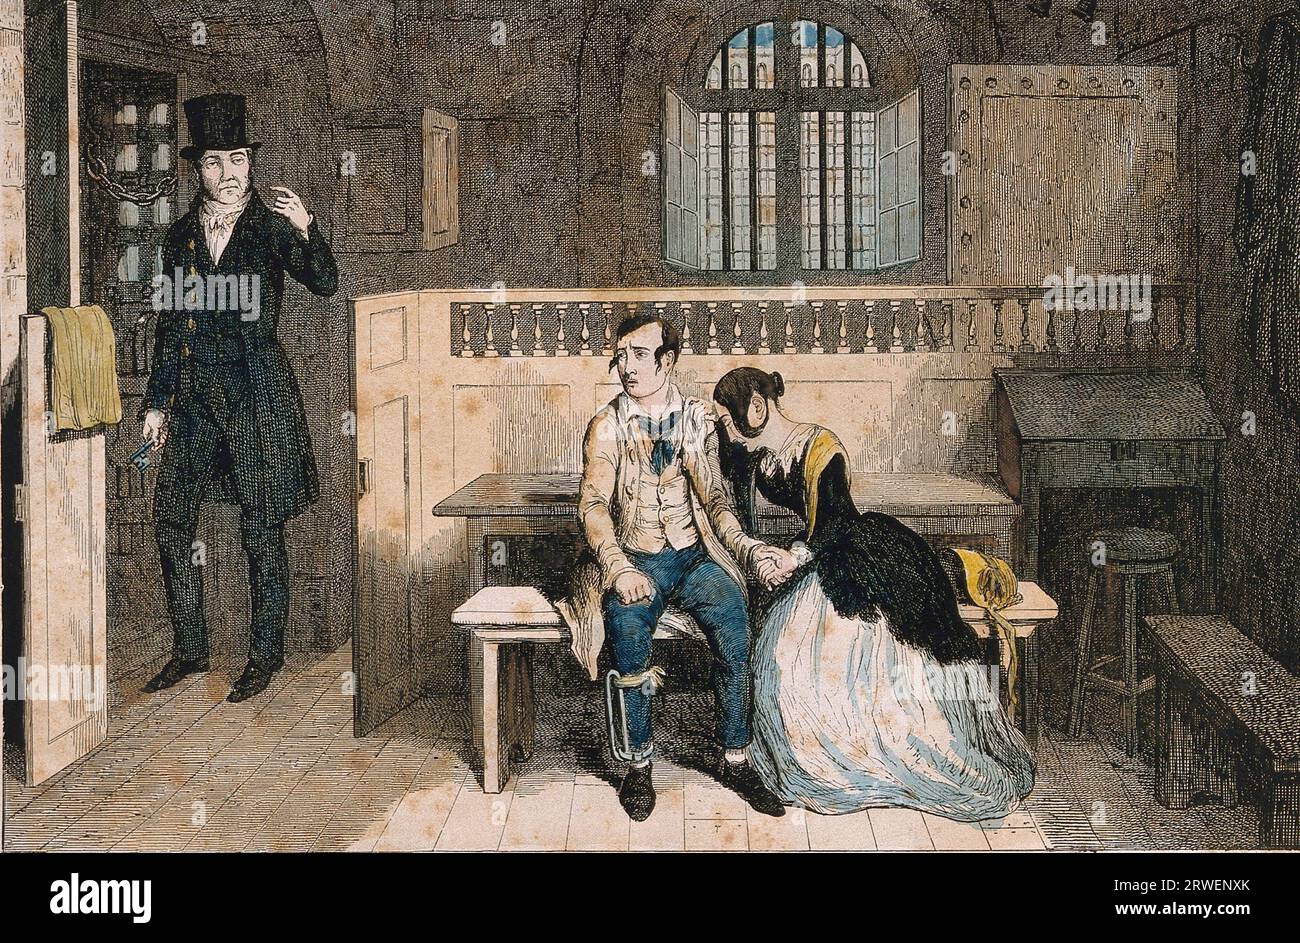 A convicted thief sits in prison with his distraught sister, who has been acquitted. Colored etching by G. Cruikshank, 1848, England, Historical, digitally restored reproduction from a 19th century origina Stock Photo